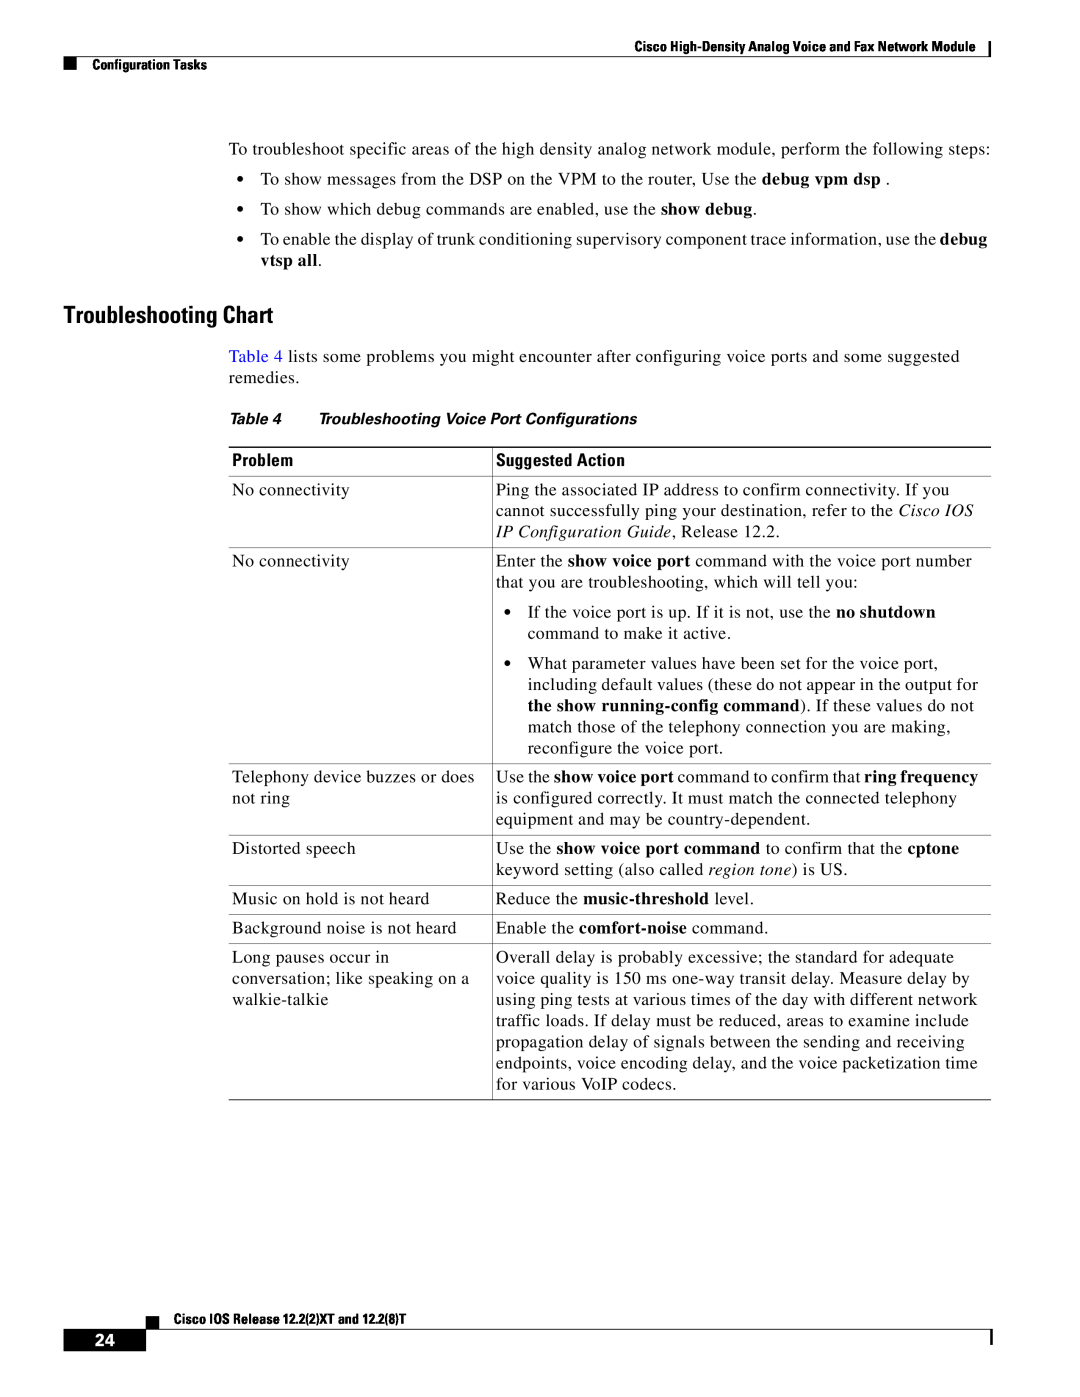 Weed Eater 2600 manual Troubleshooting Chart, Problem, Suggested Action 